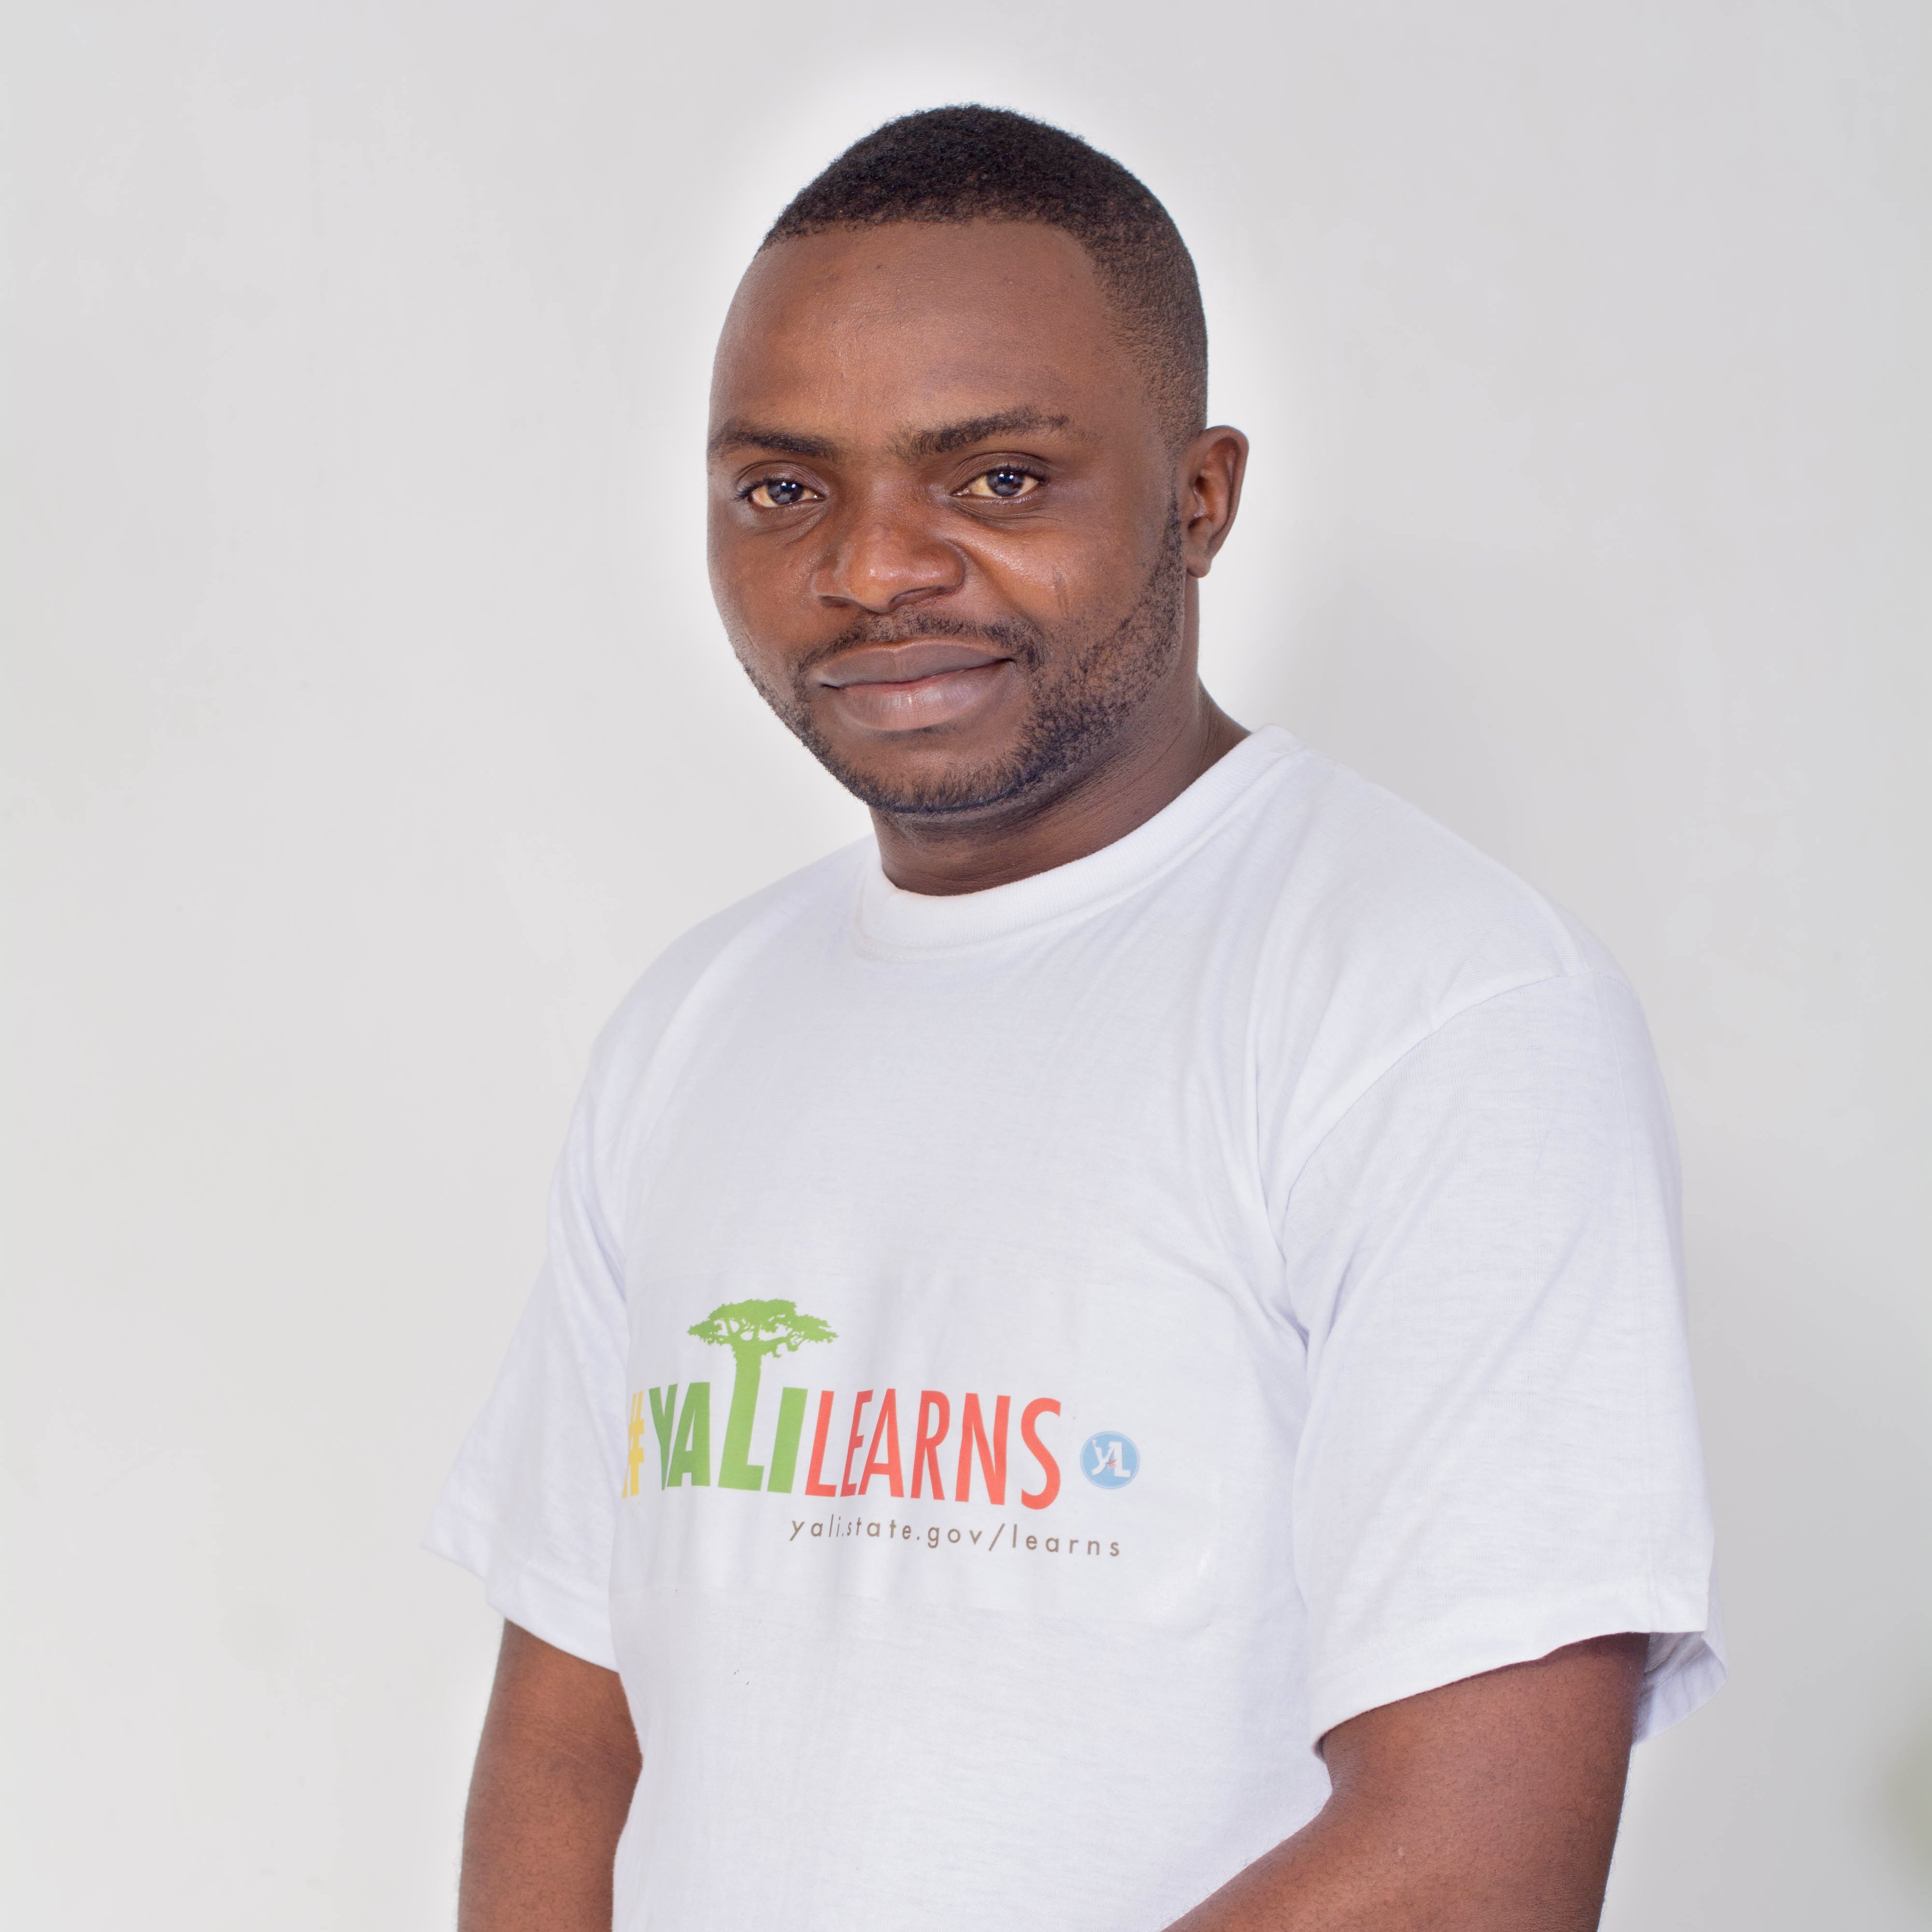 Youth Empowerment and Sustainable Development Strategist, Founder, Nkwa4change Solutions.